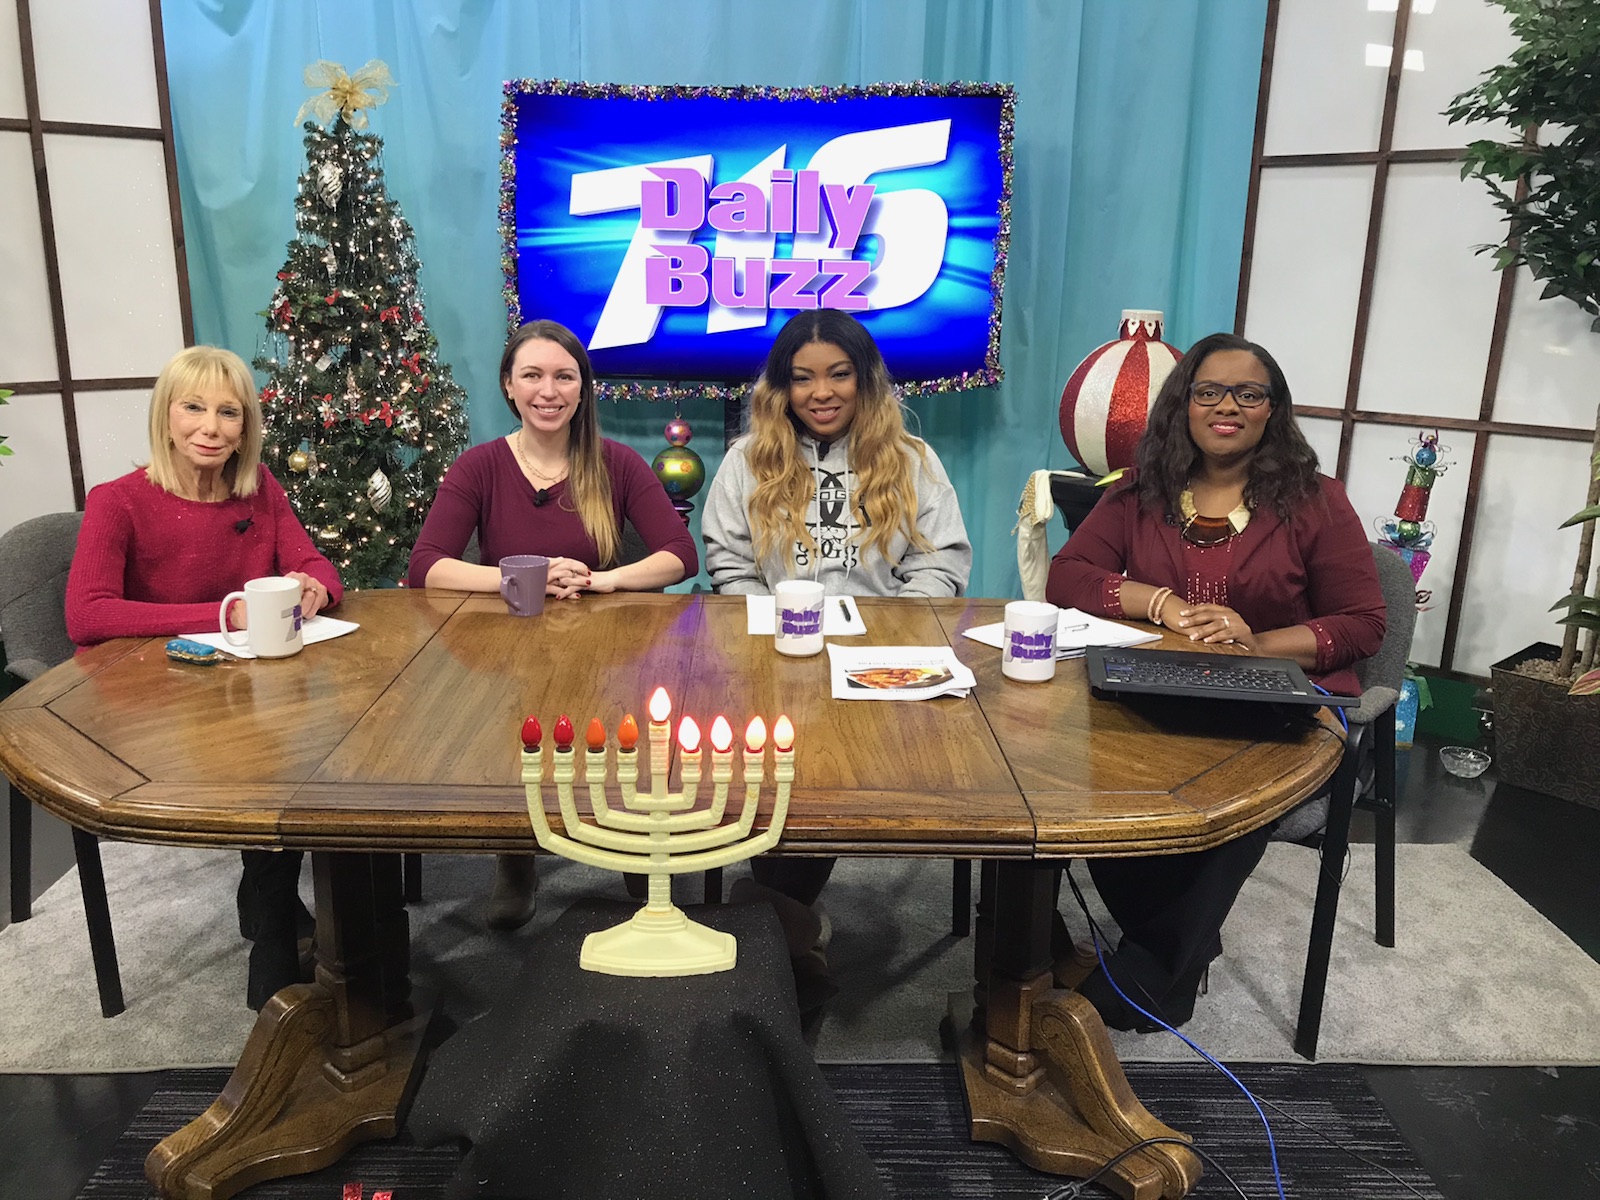 Daily Buzz 716 talks all things 'good news' with Sweet Buffalo Sweet